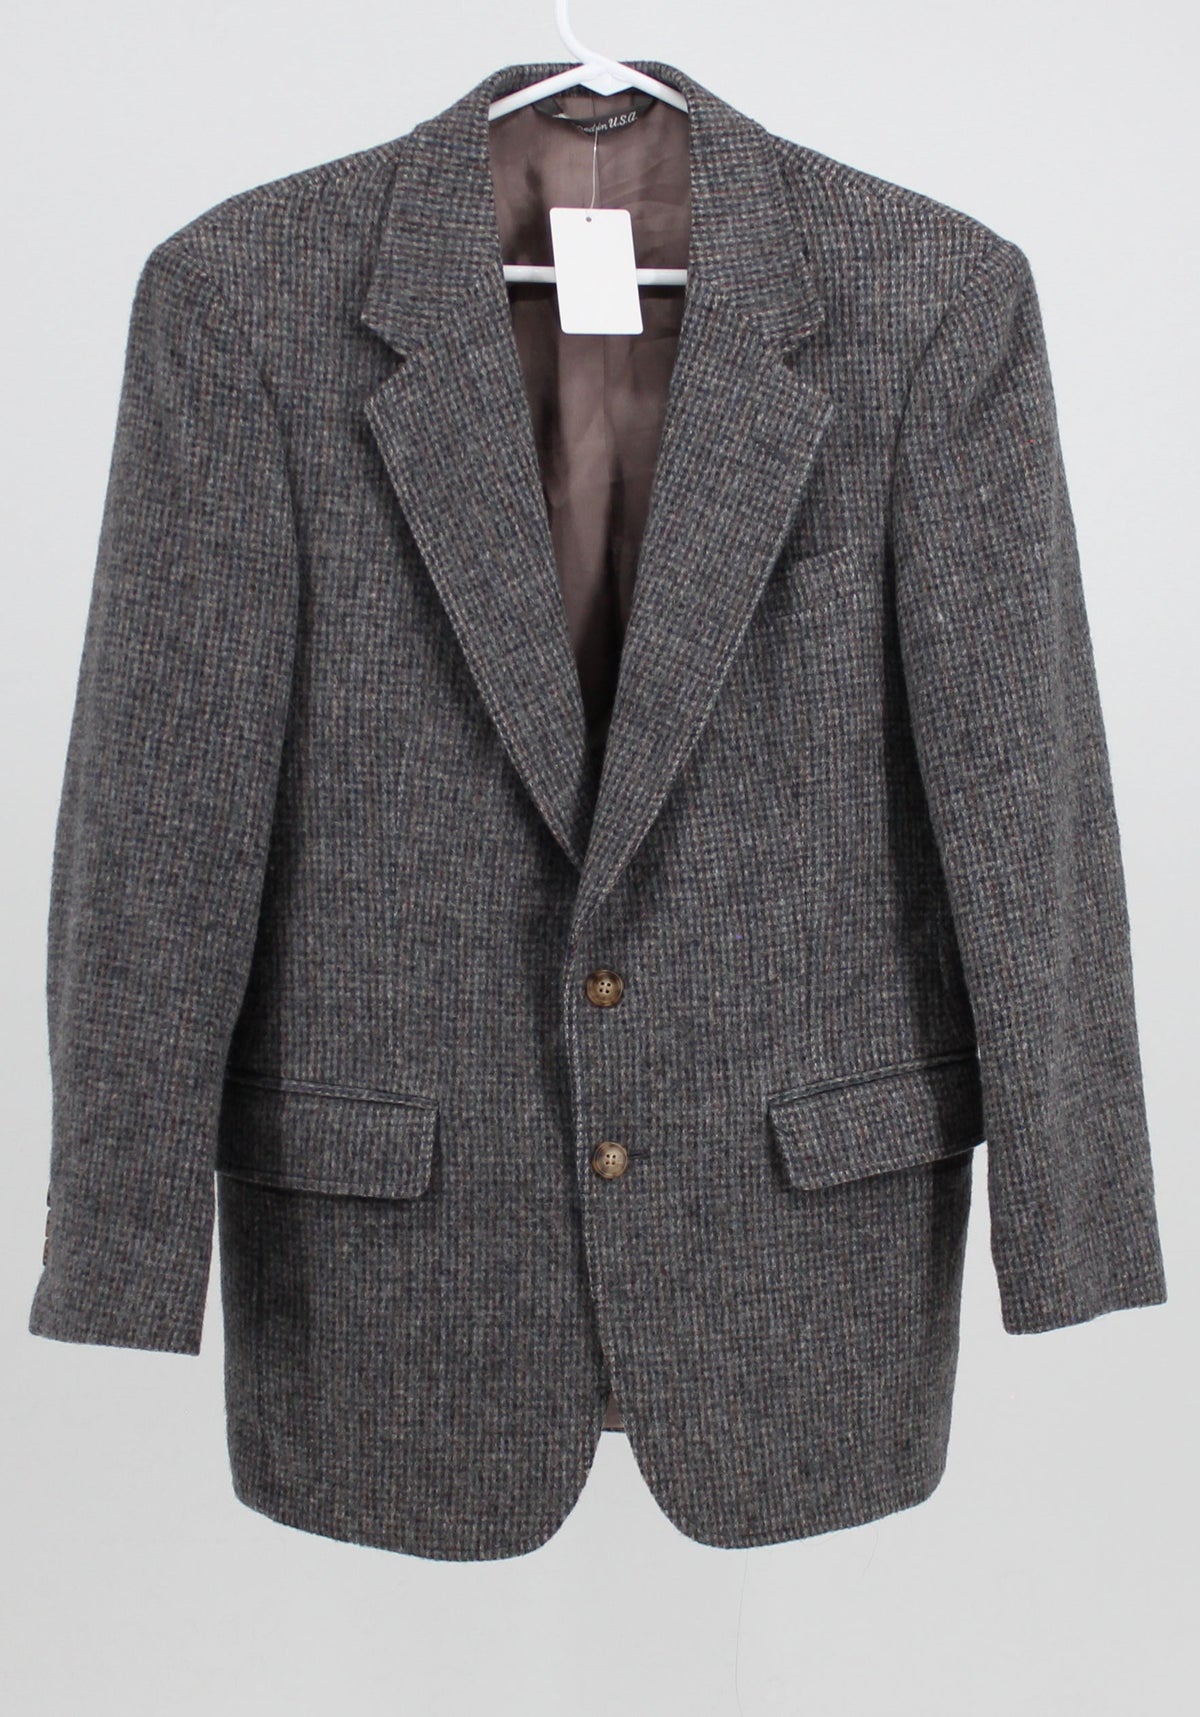 Tailored U.S.A Grey and Brown Stripped Blazer